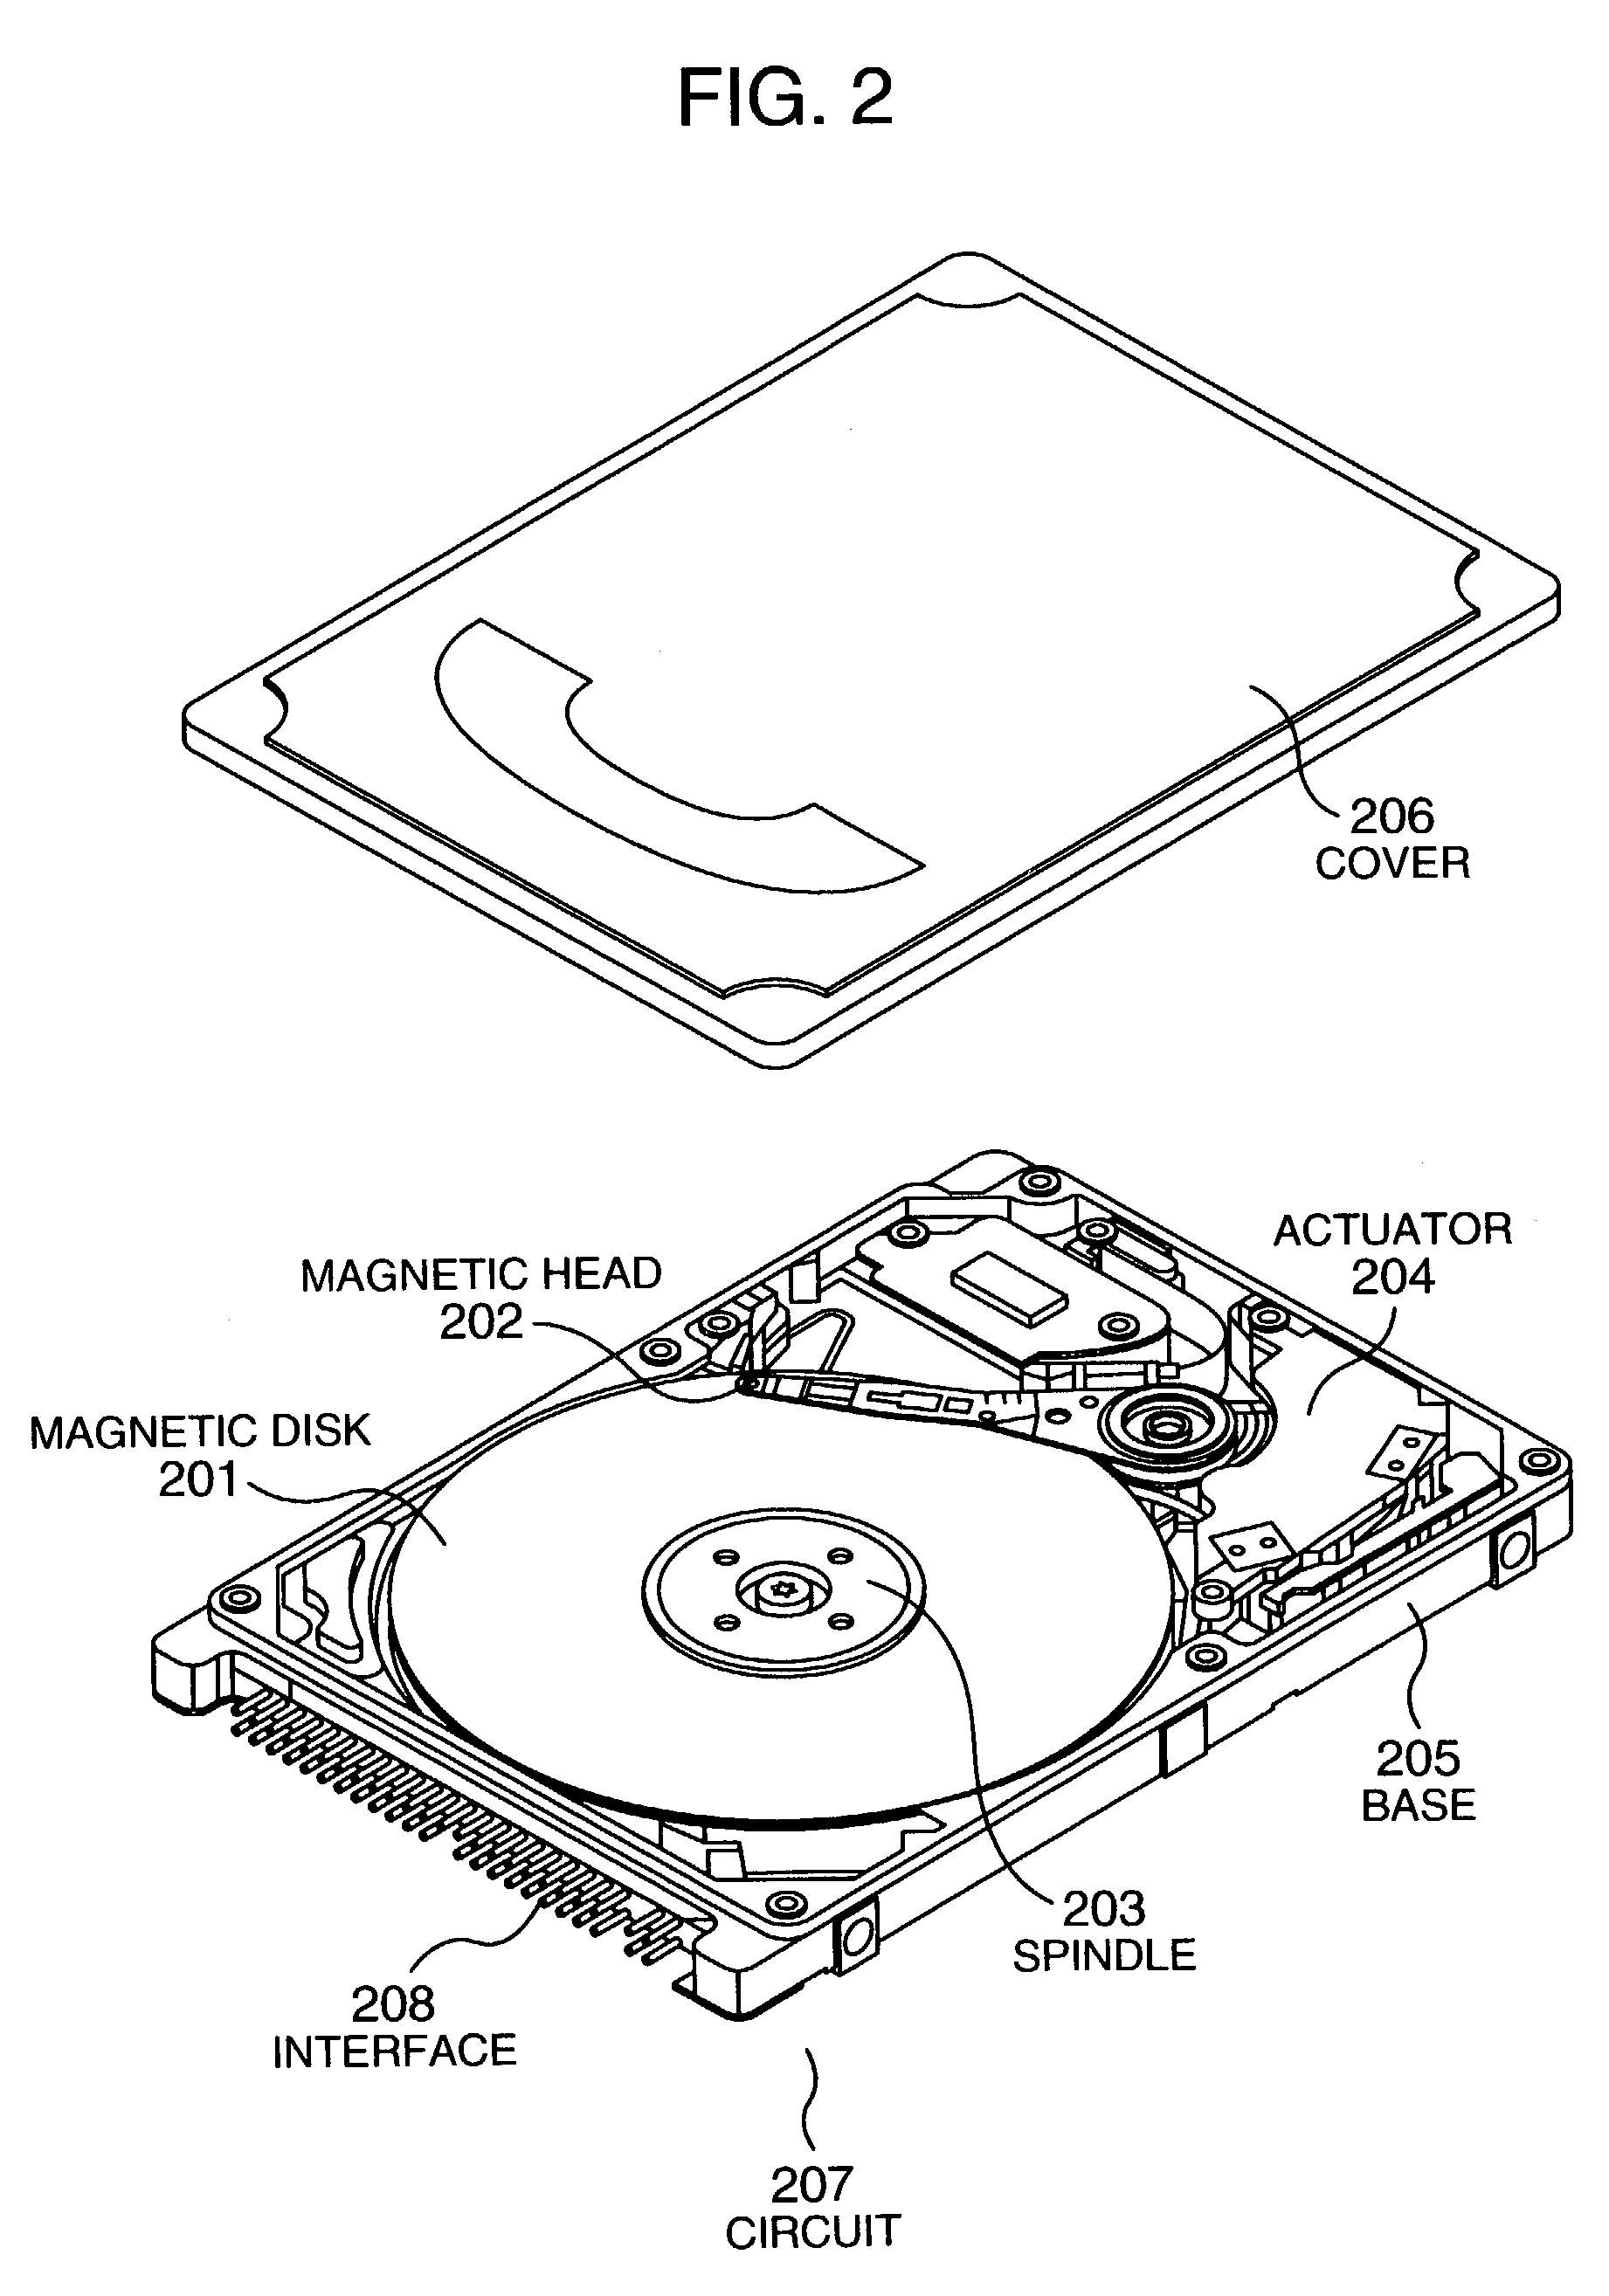 Magnetic disk drive which accesses host RAM